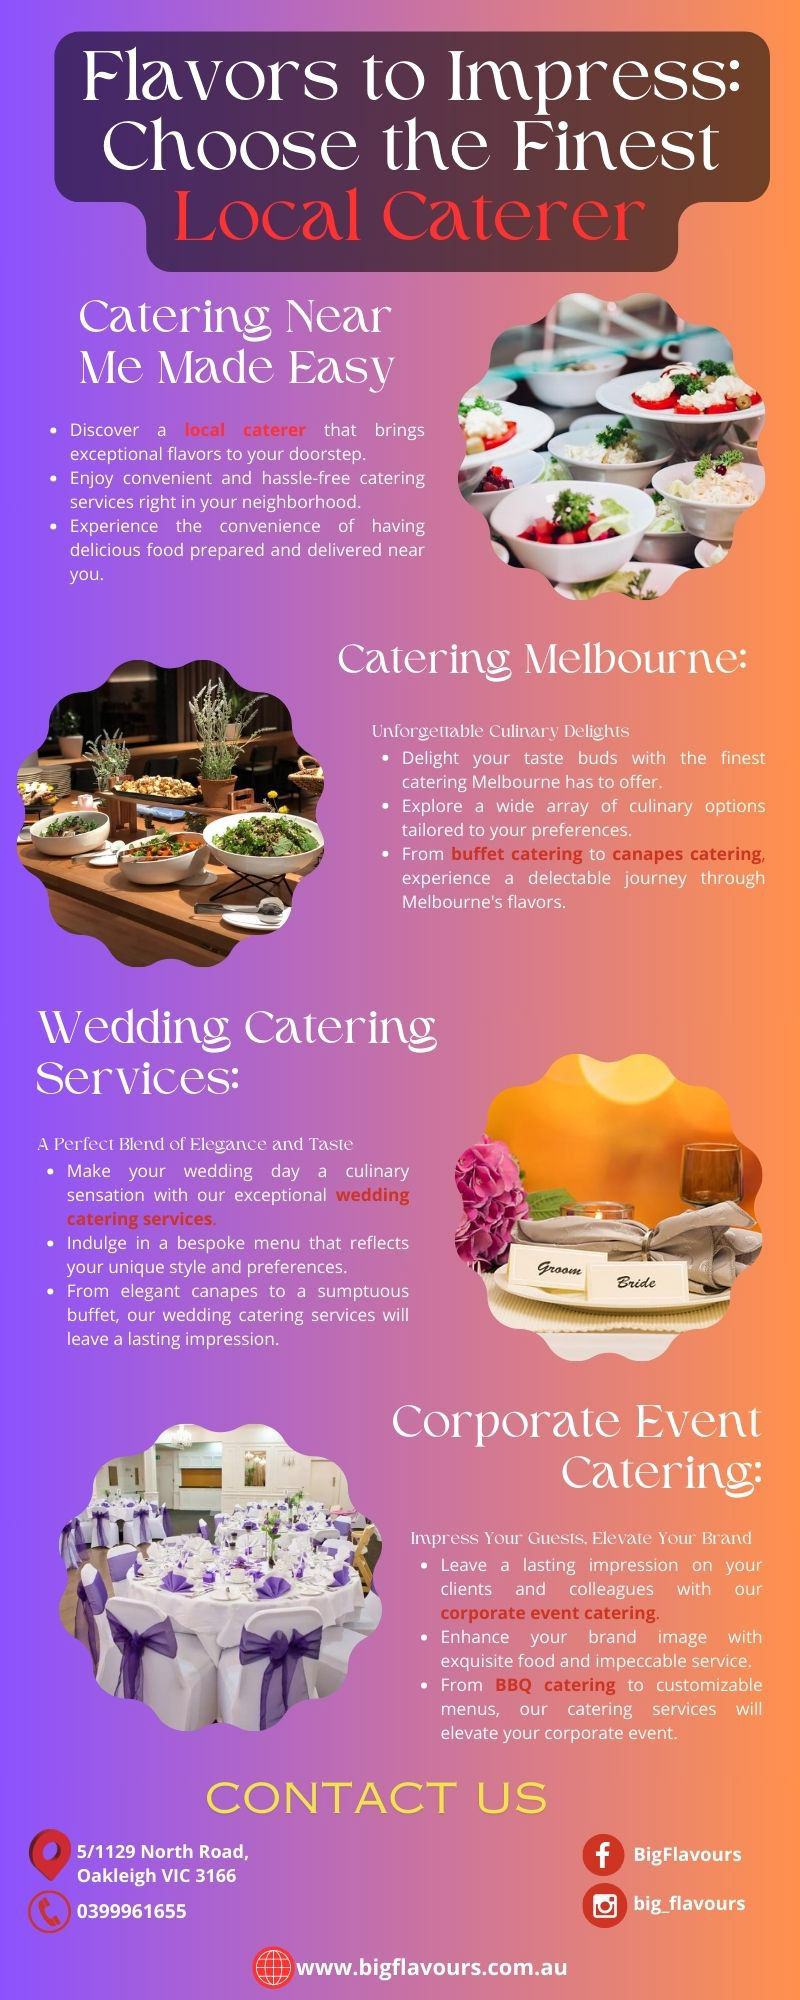 Buffet Catering BBQ catering canapes catering Local Caterer